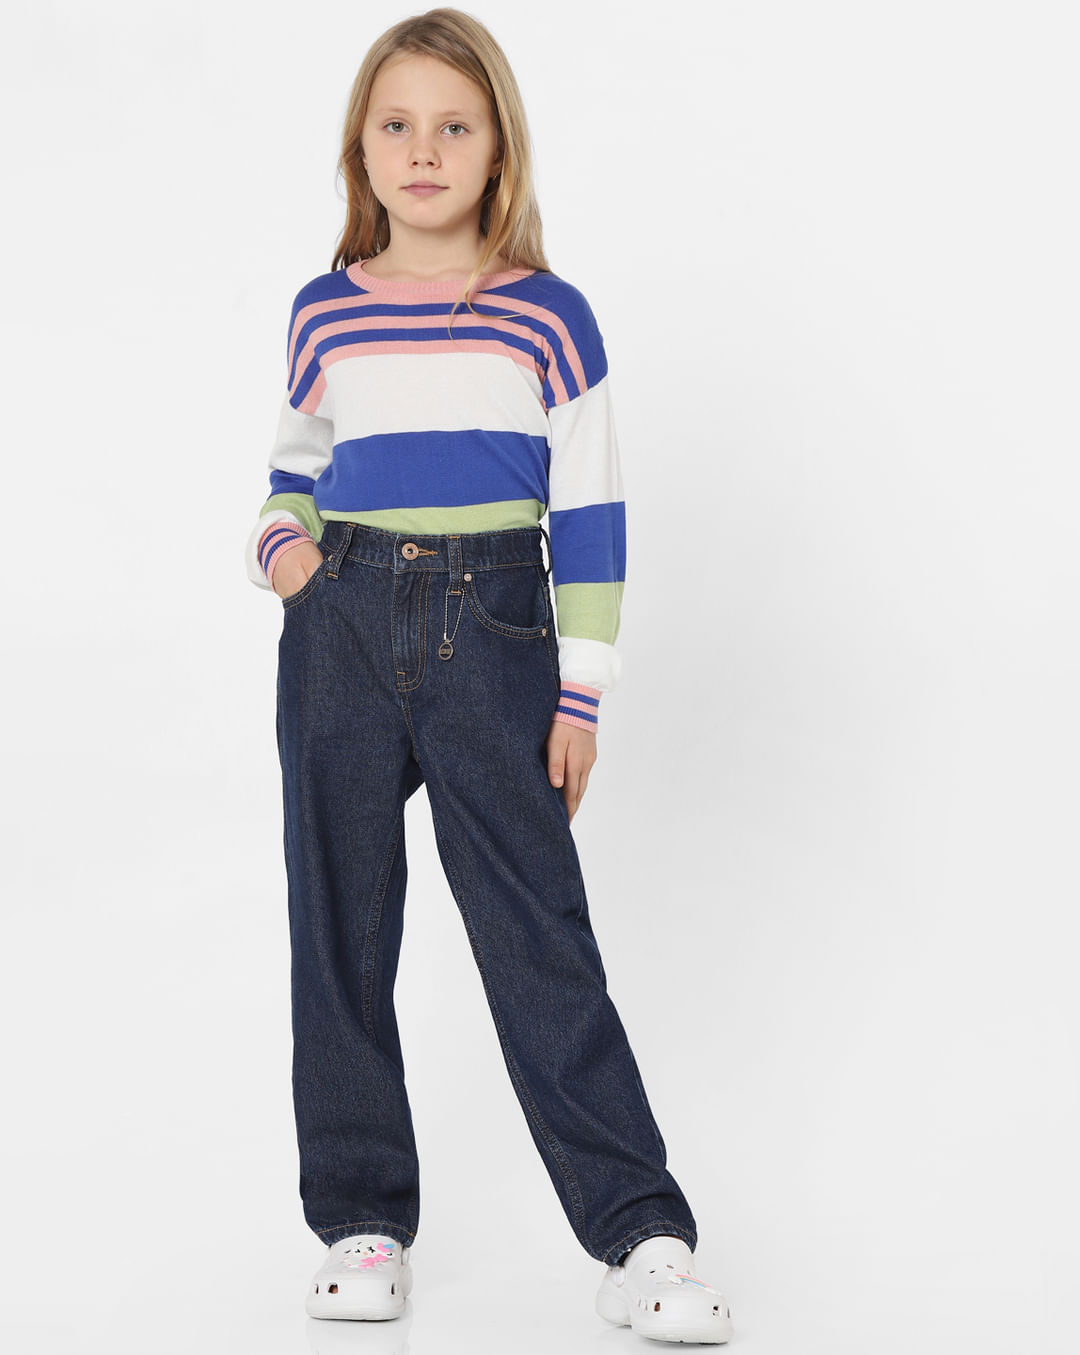 Shop Girl DARKWASH Kids High-Rise Distressed Ankle Jeggings with Washwell™  - 10.25 KWD in Kuwait